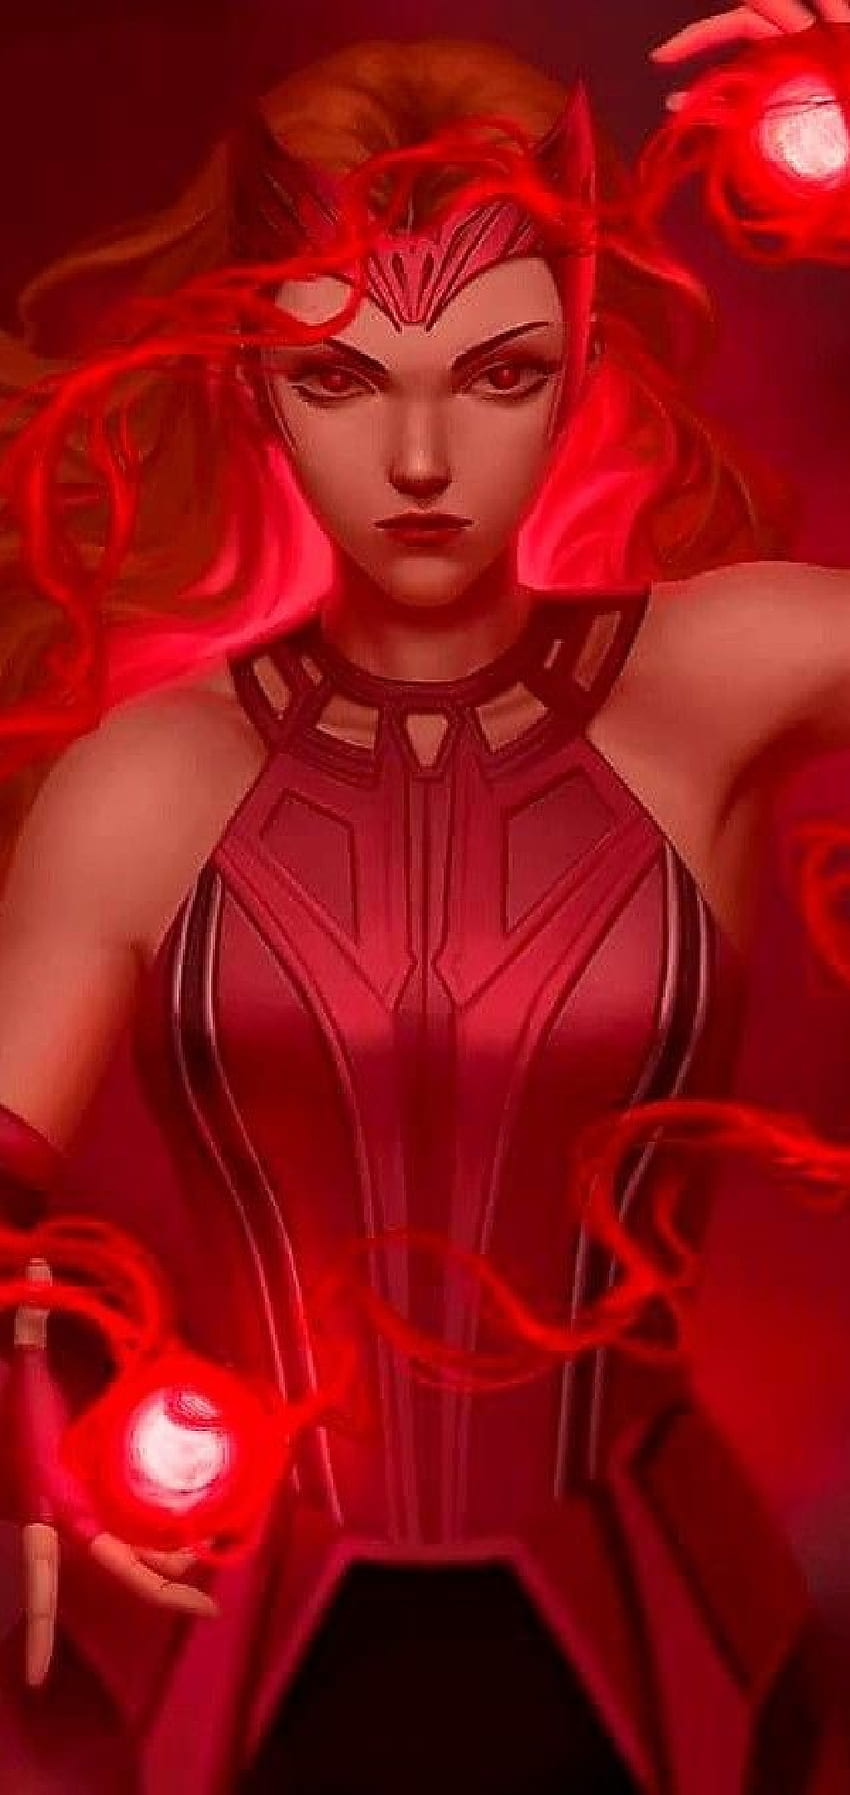 Scarlet witch 777, marvel, scarlet witch, Wanda Maximoff, red power HD phone wallpaper